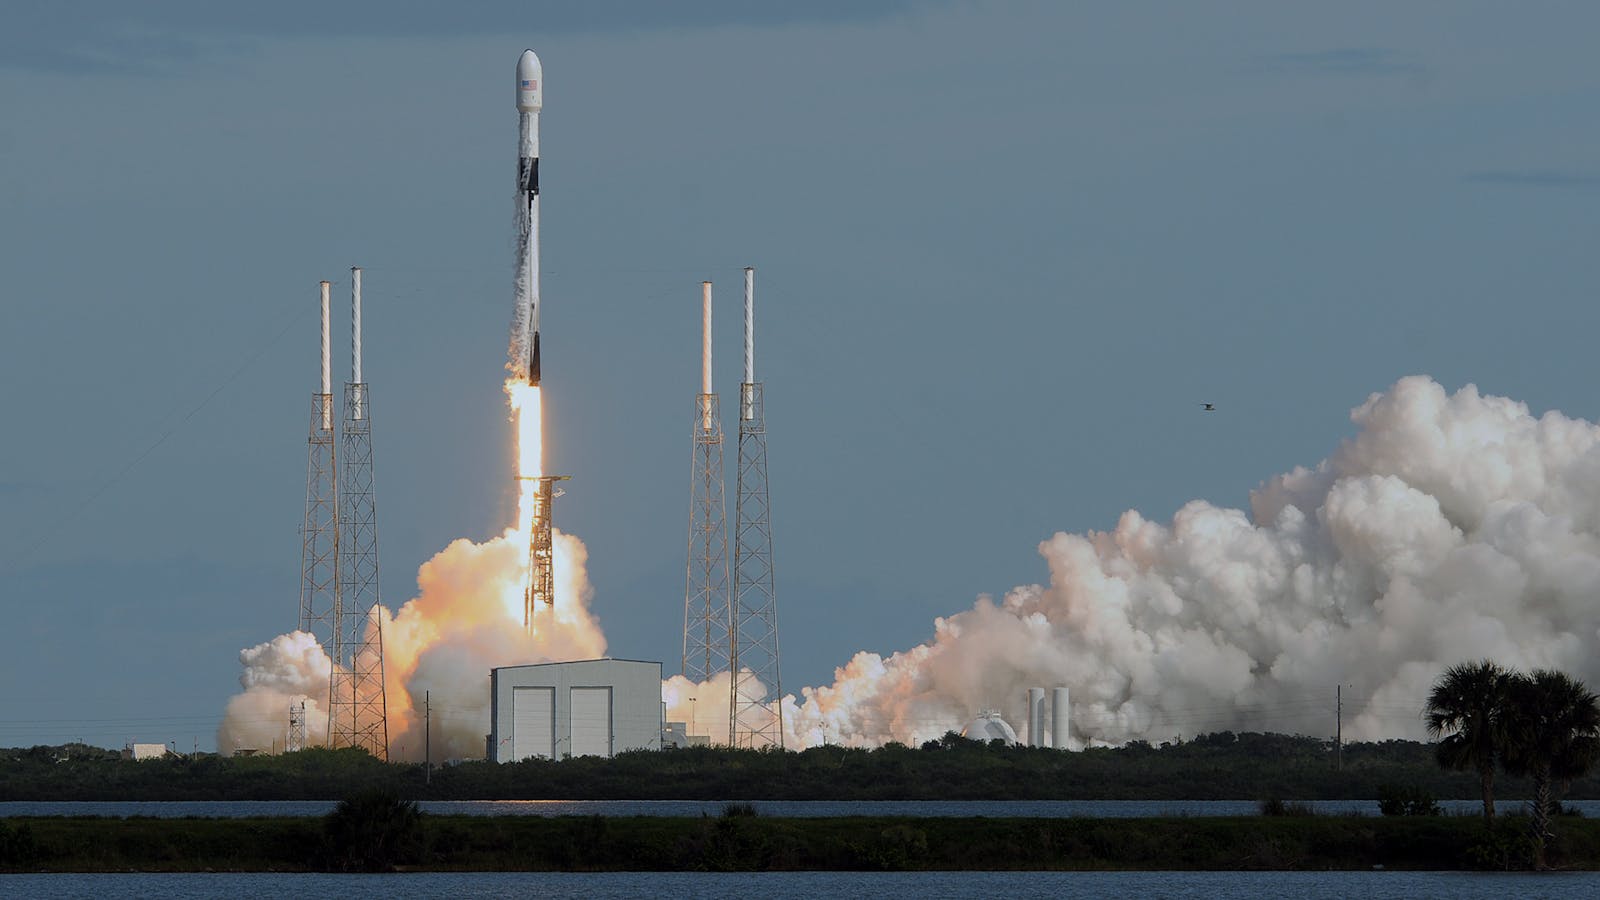 A SpaceX rocket lifts off from Cape Canaveral Air Force Station carrying 60 Starlink satellites in 2019. Photo by Getty